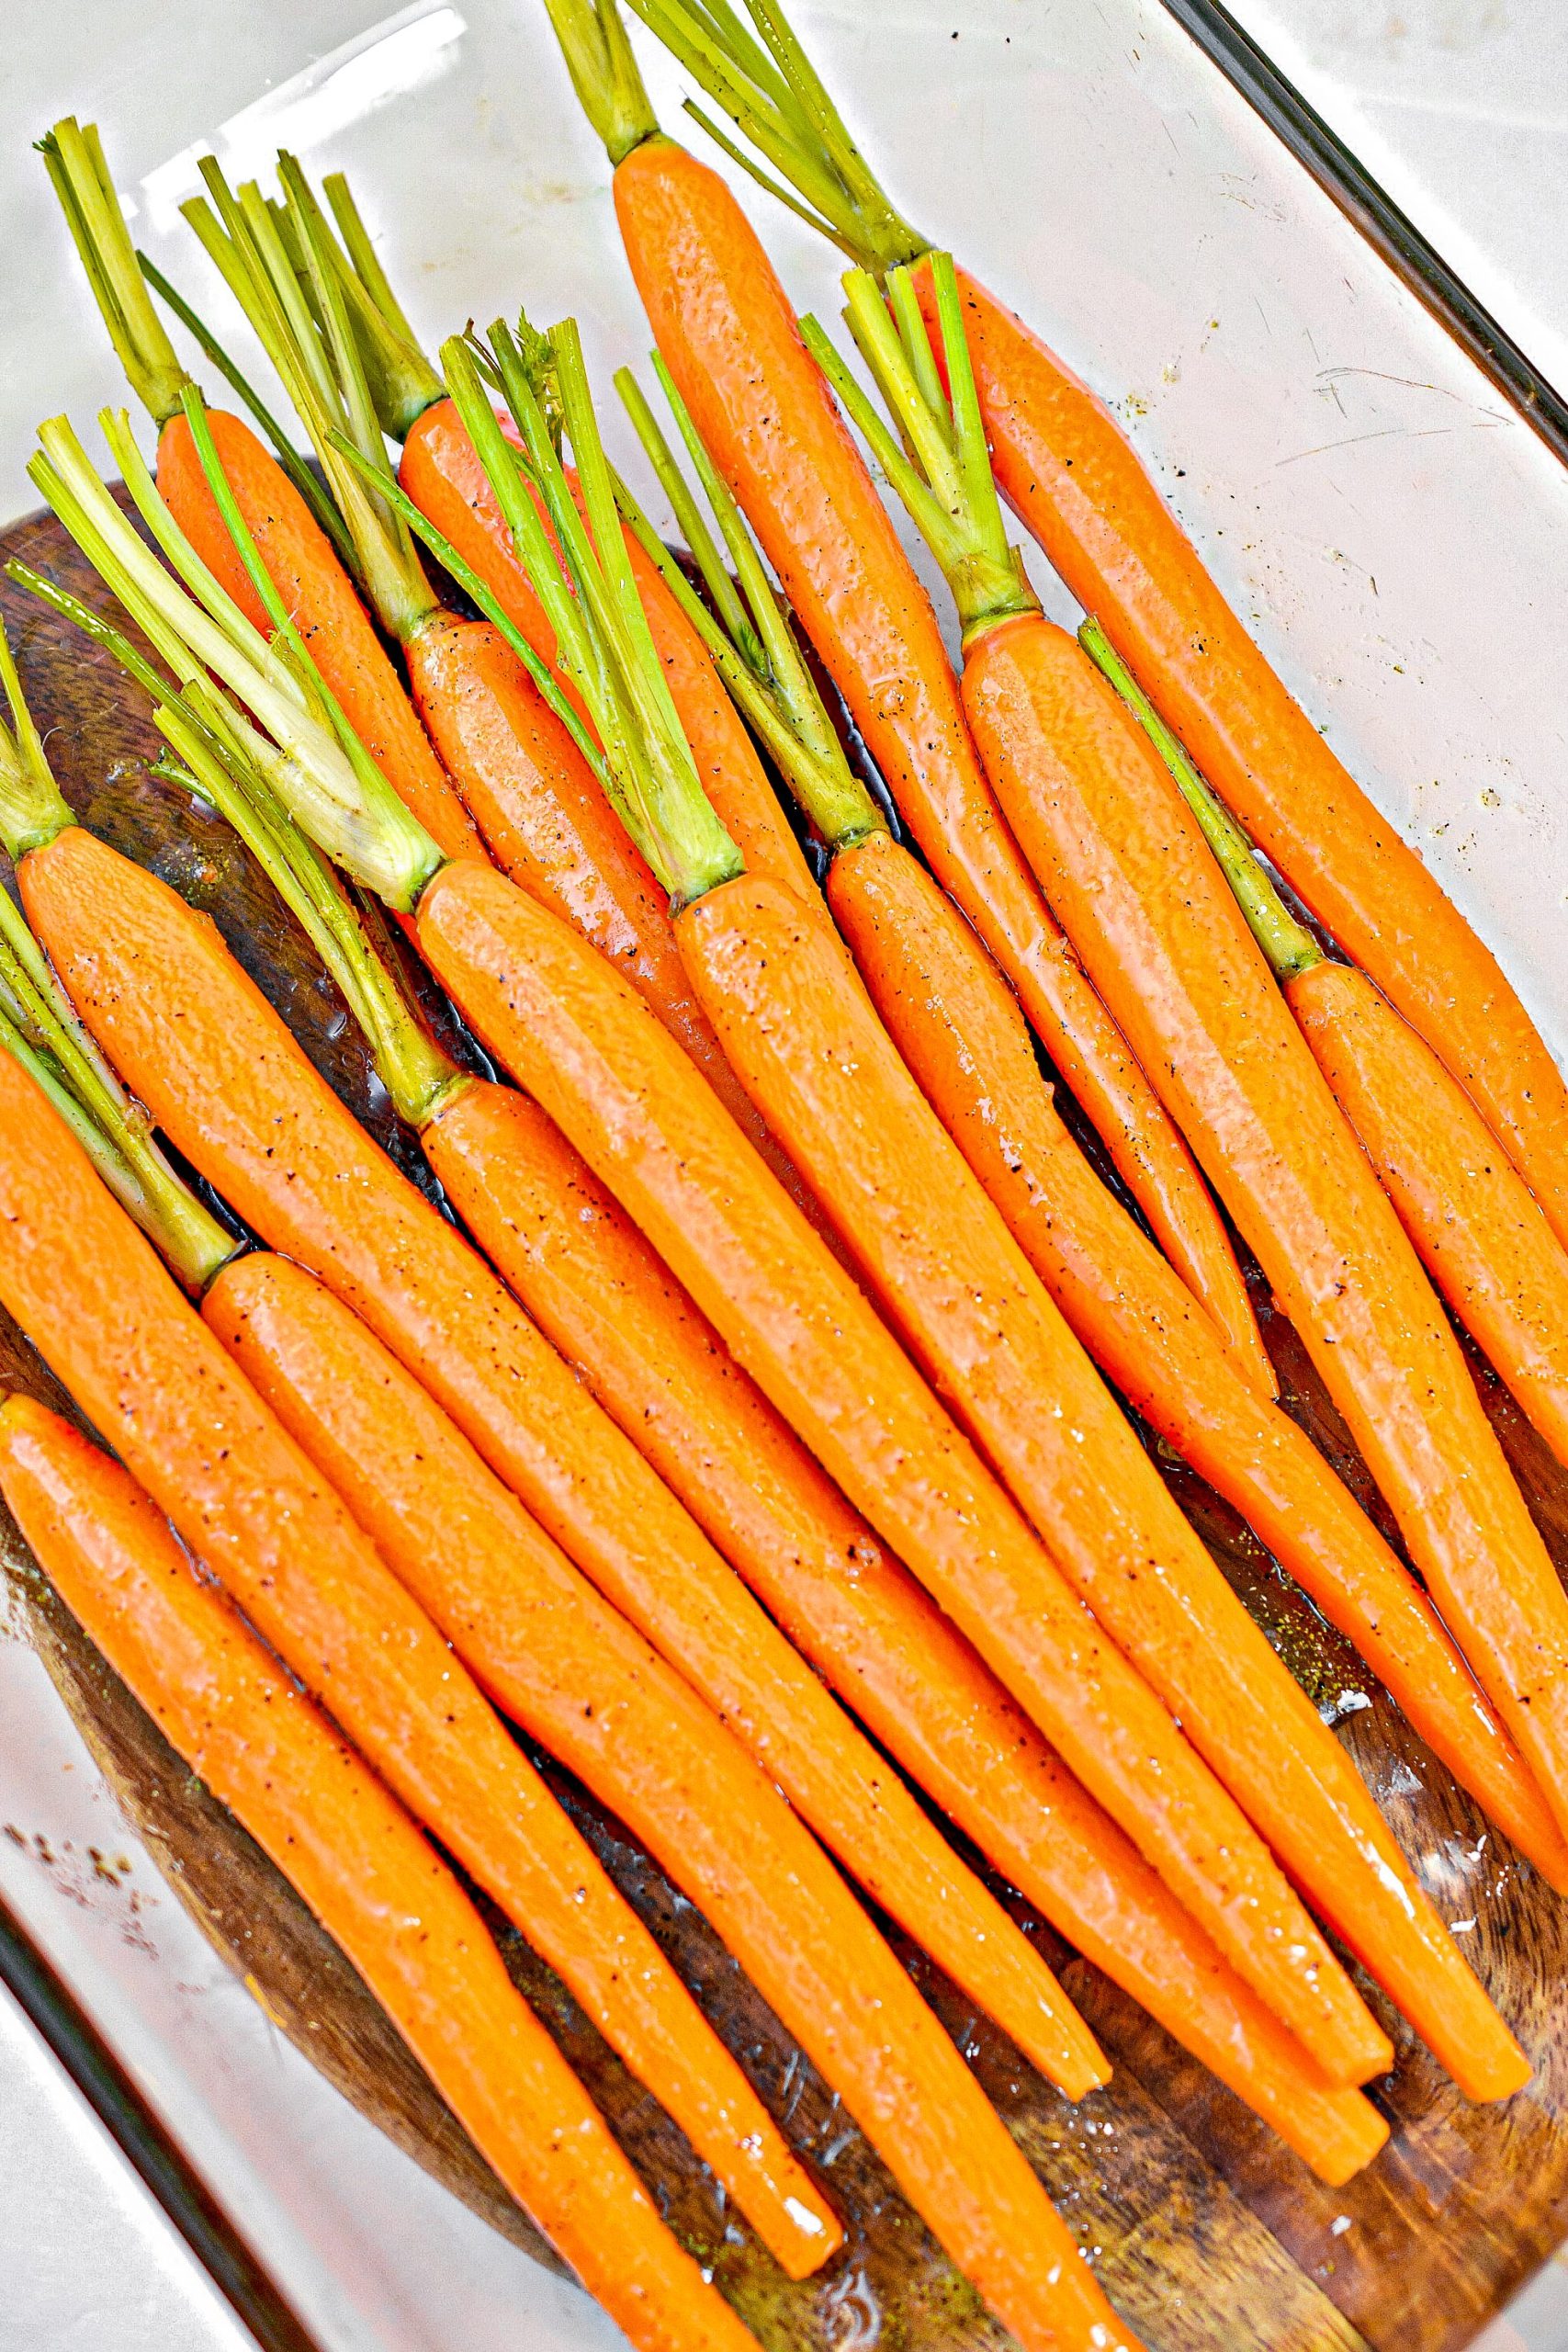 Pour the mixture over the carrots in the dish, and toss to coat well.